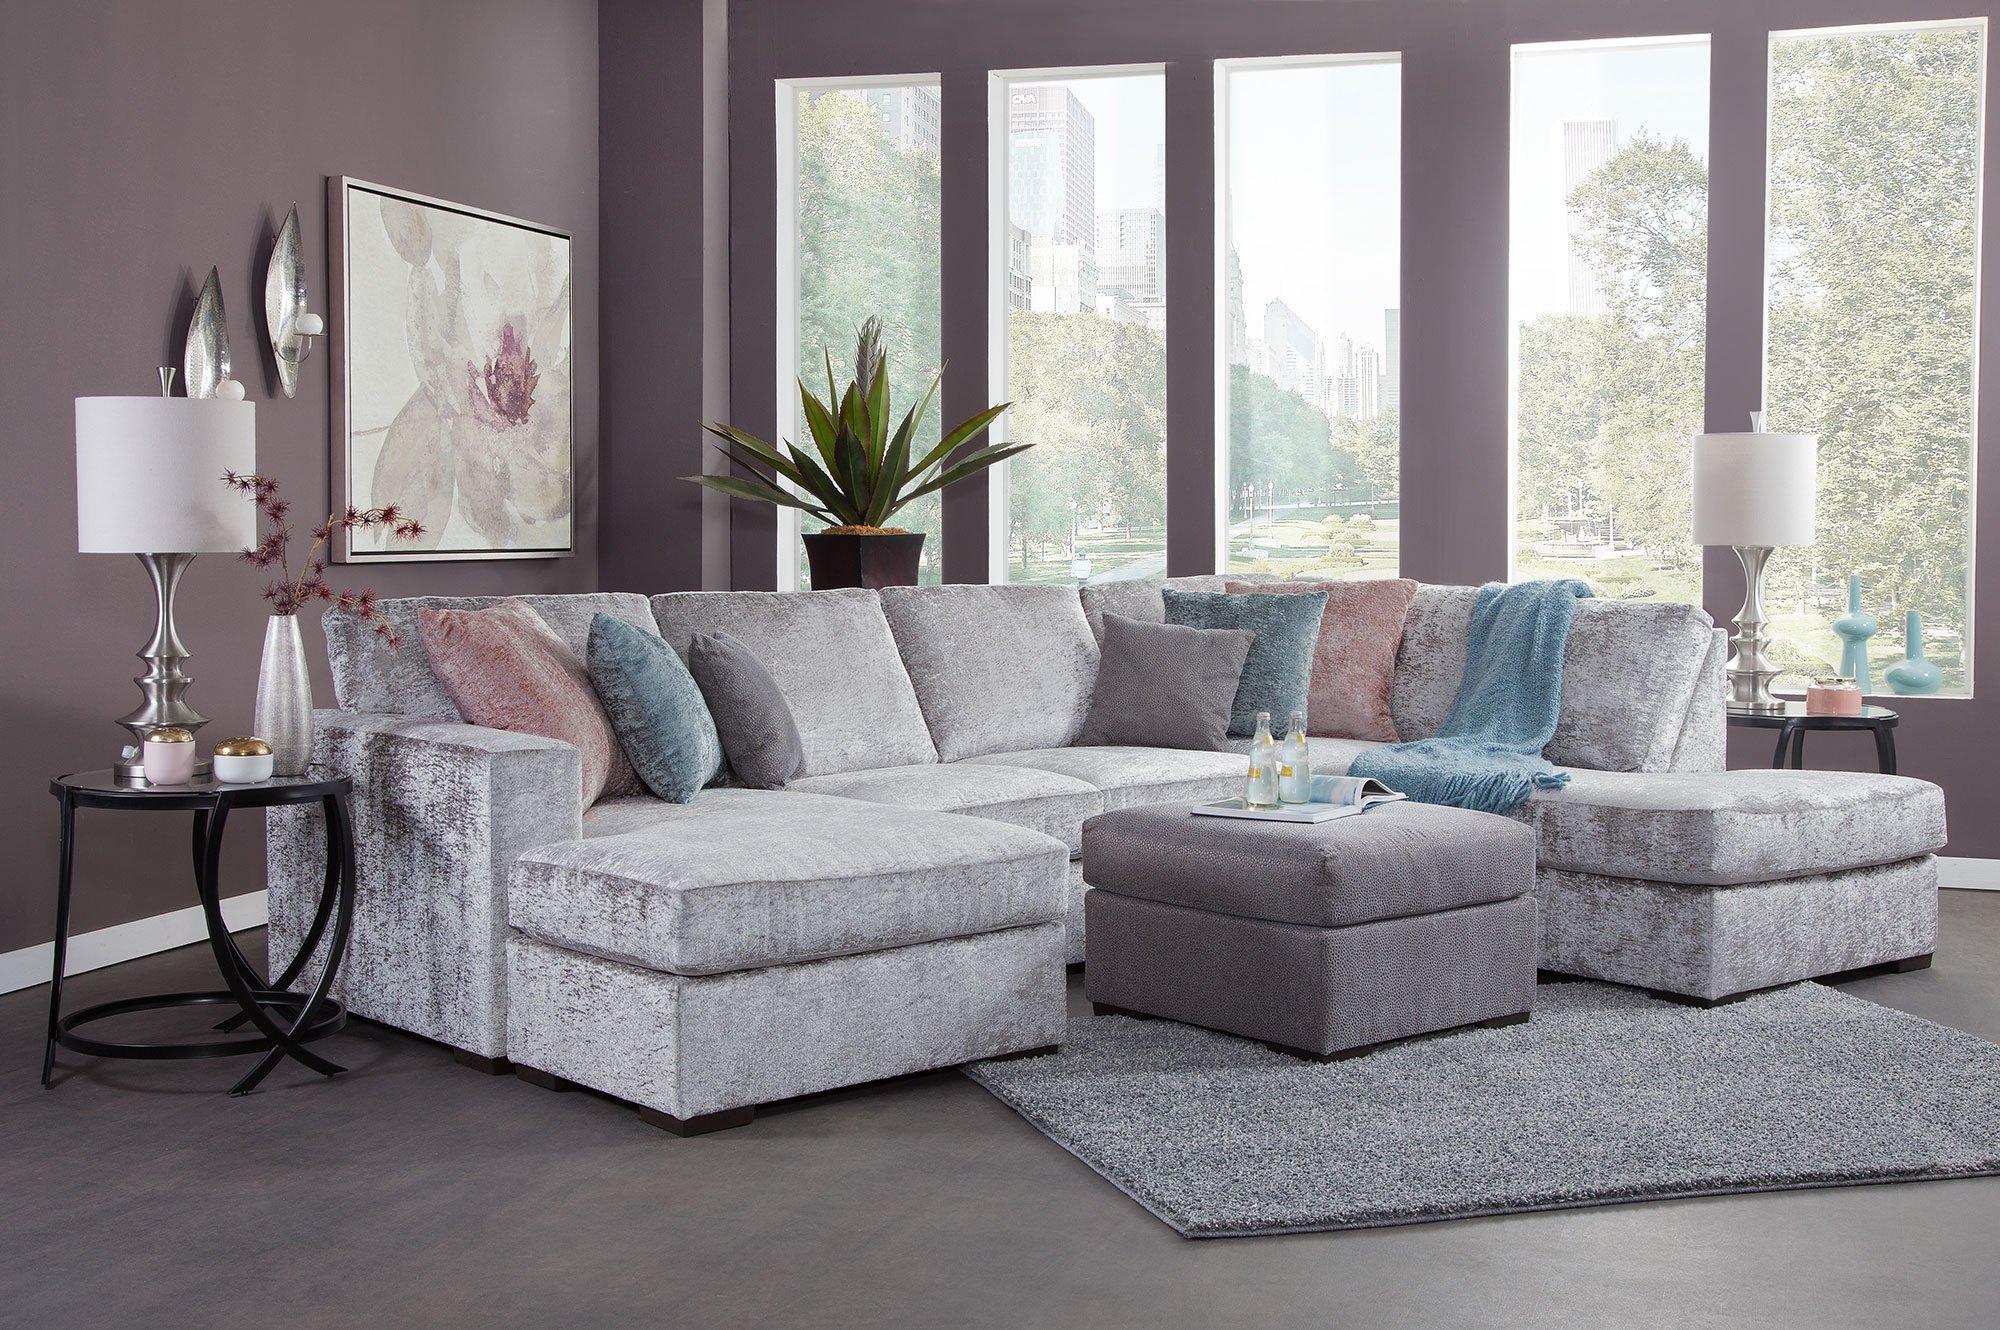 Woodhaven 4 Piece Sonja Living Room Collection